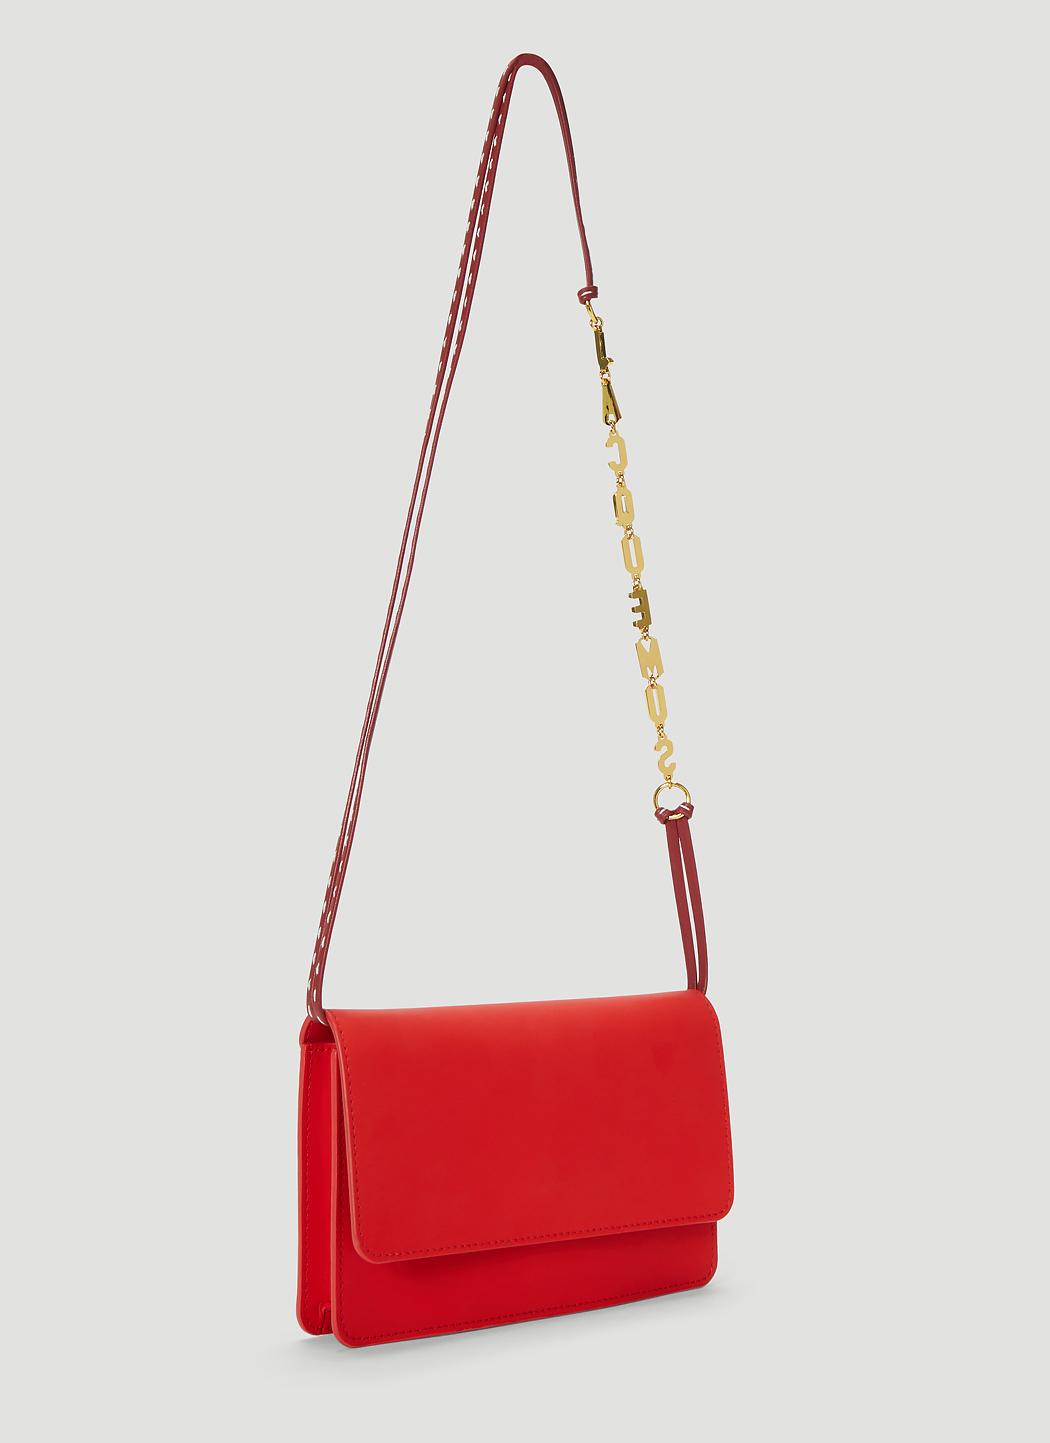 Jacquemus Leather Red Le Sac Riviera Bag - Lyst